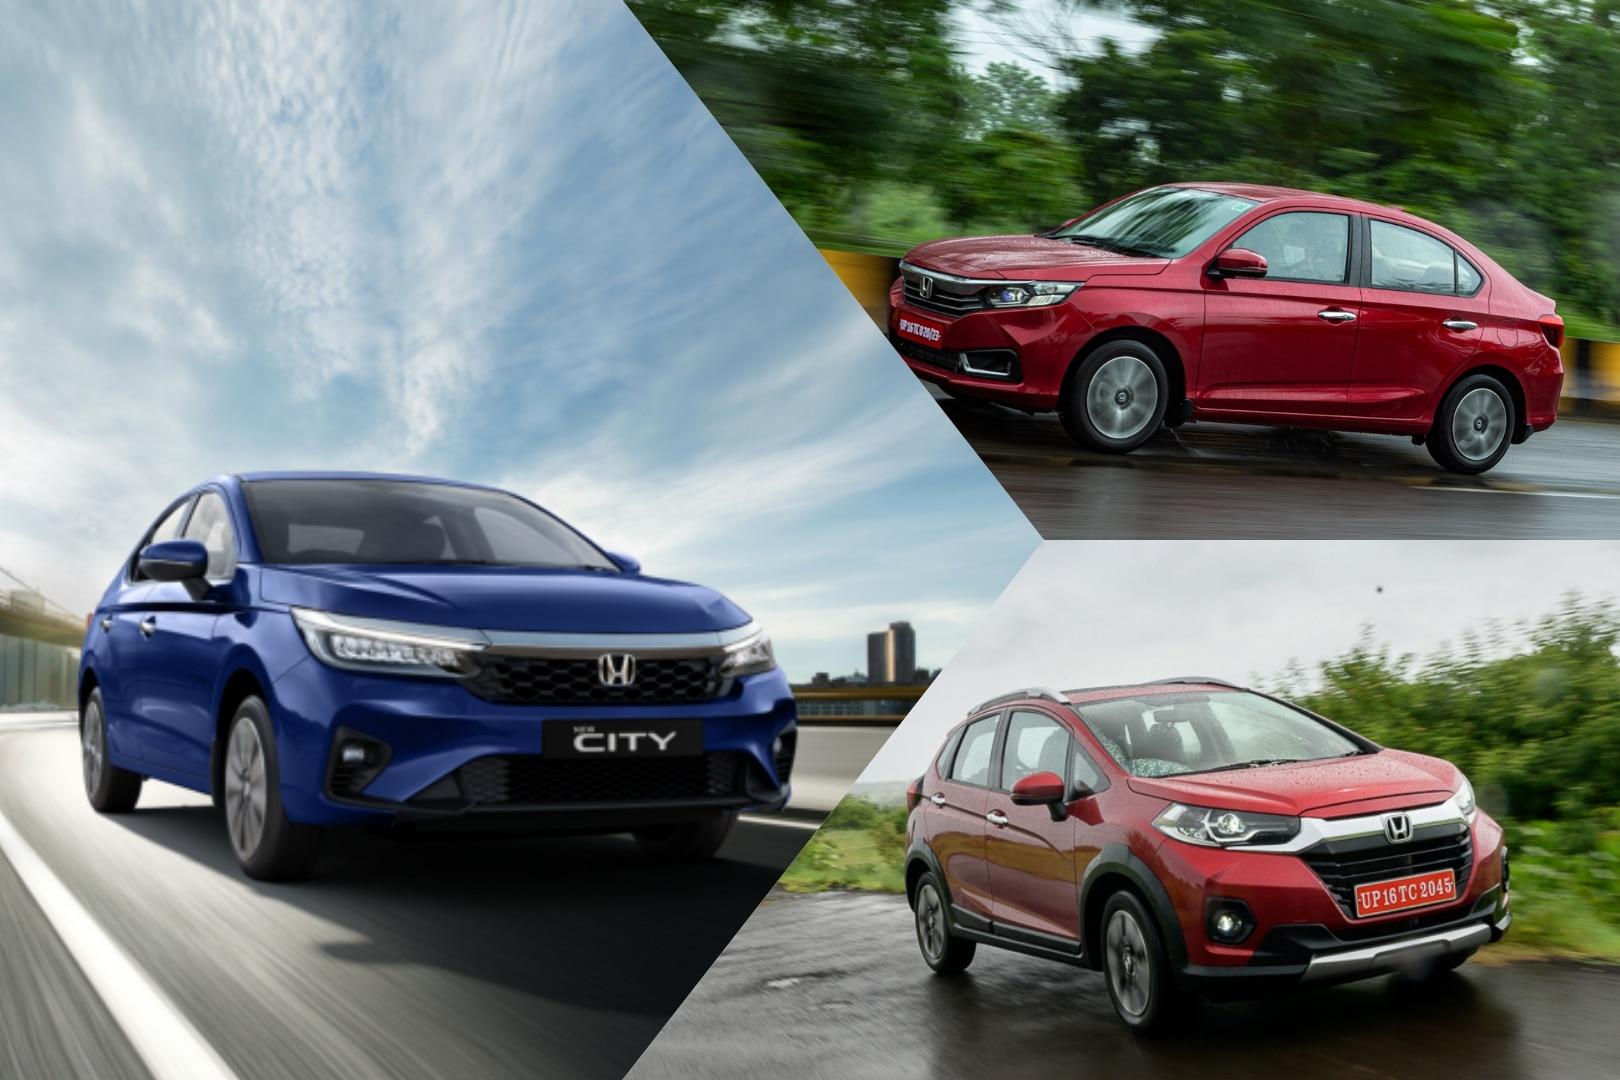 Get Benefits Of Over Rs 27,000 On Honda Cars This March